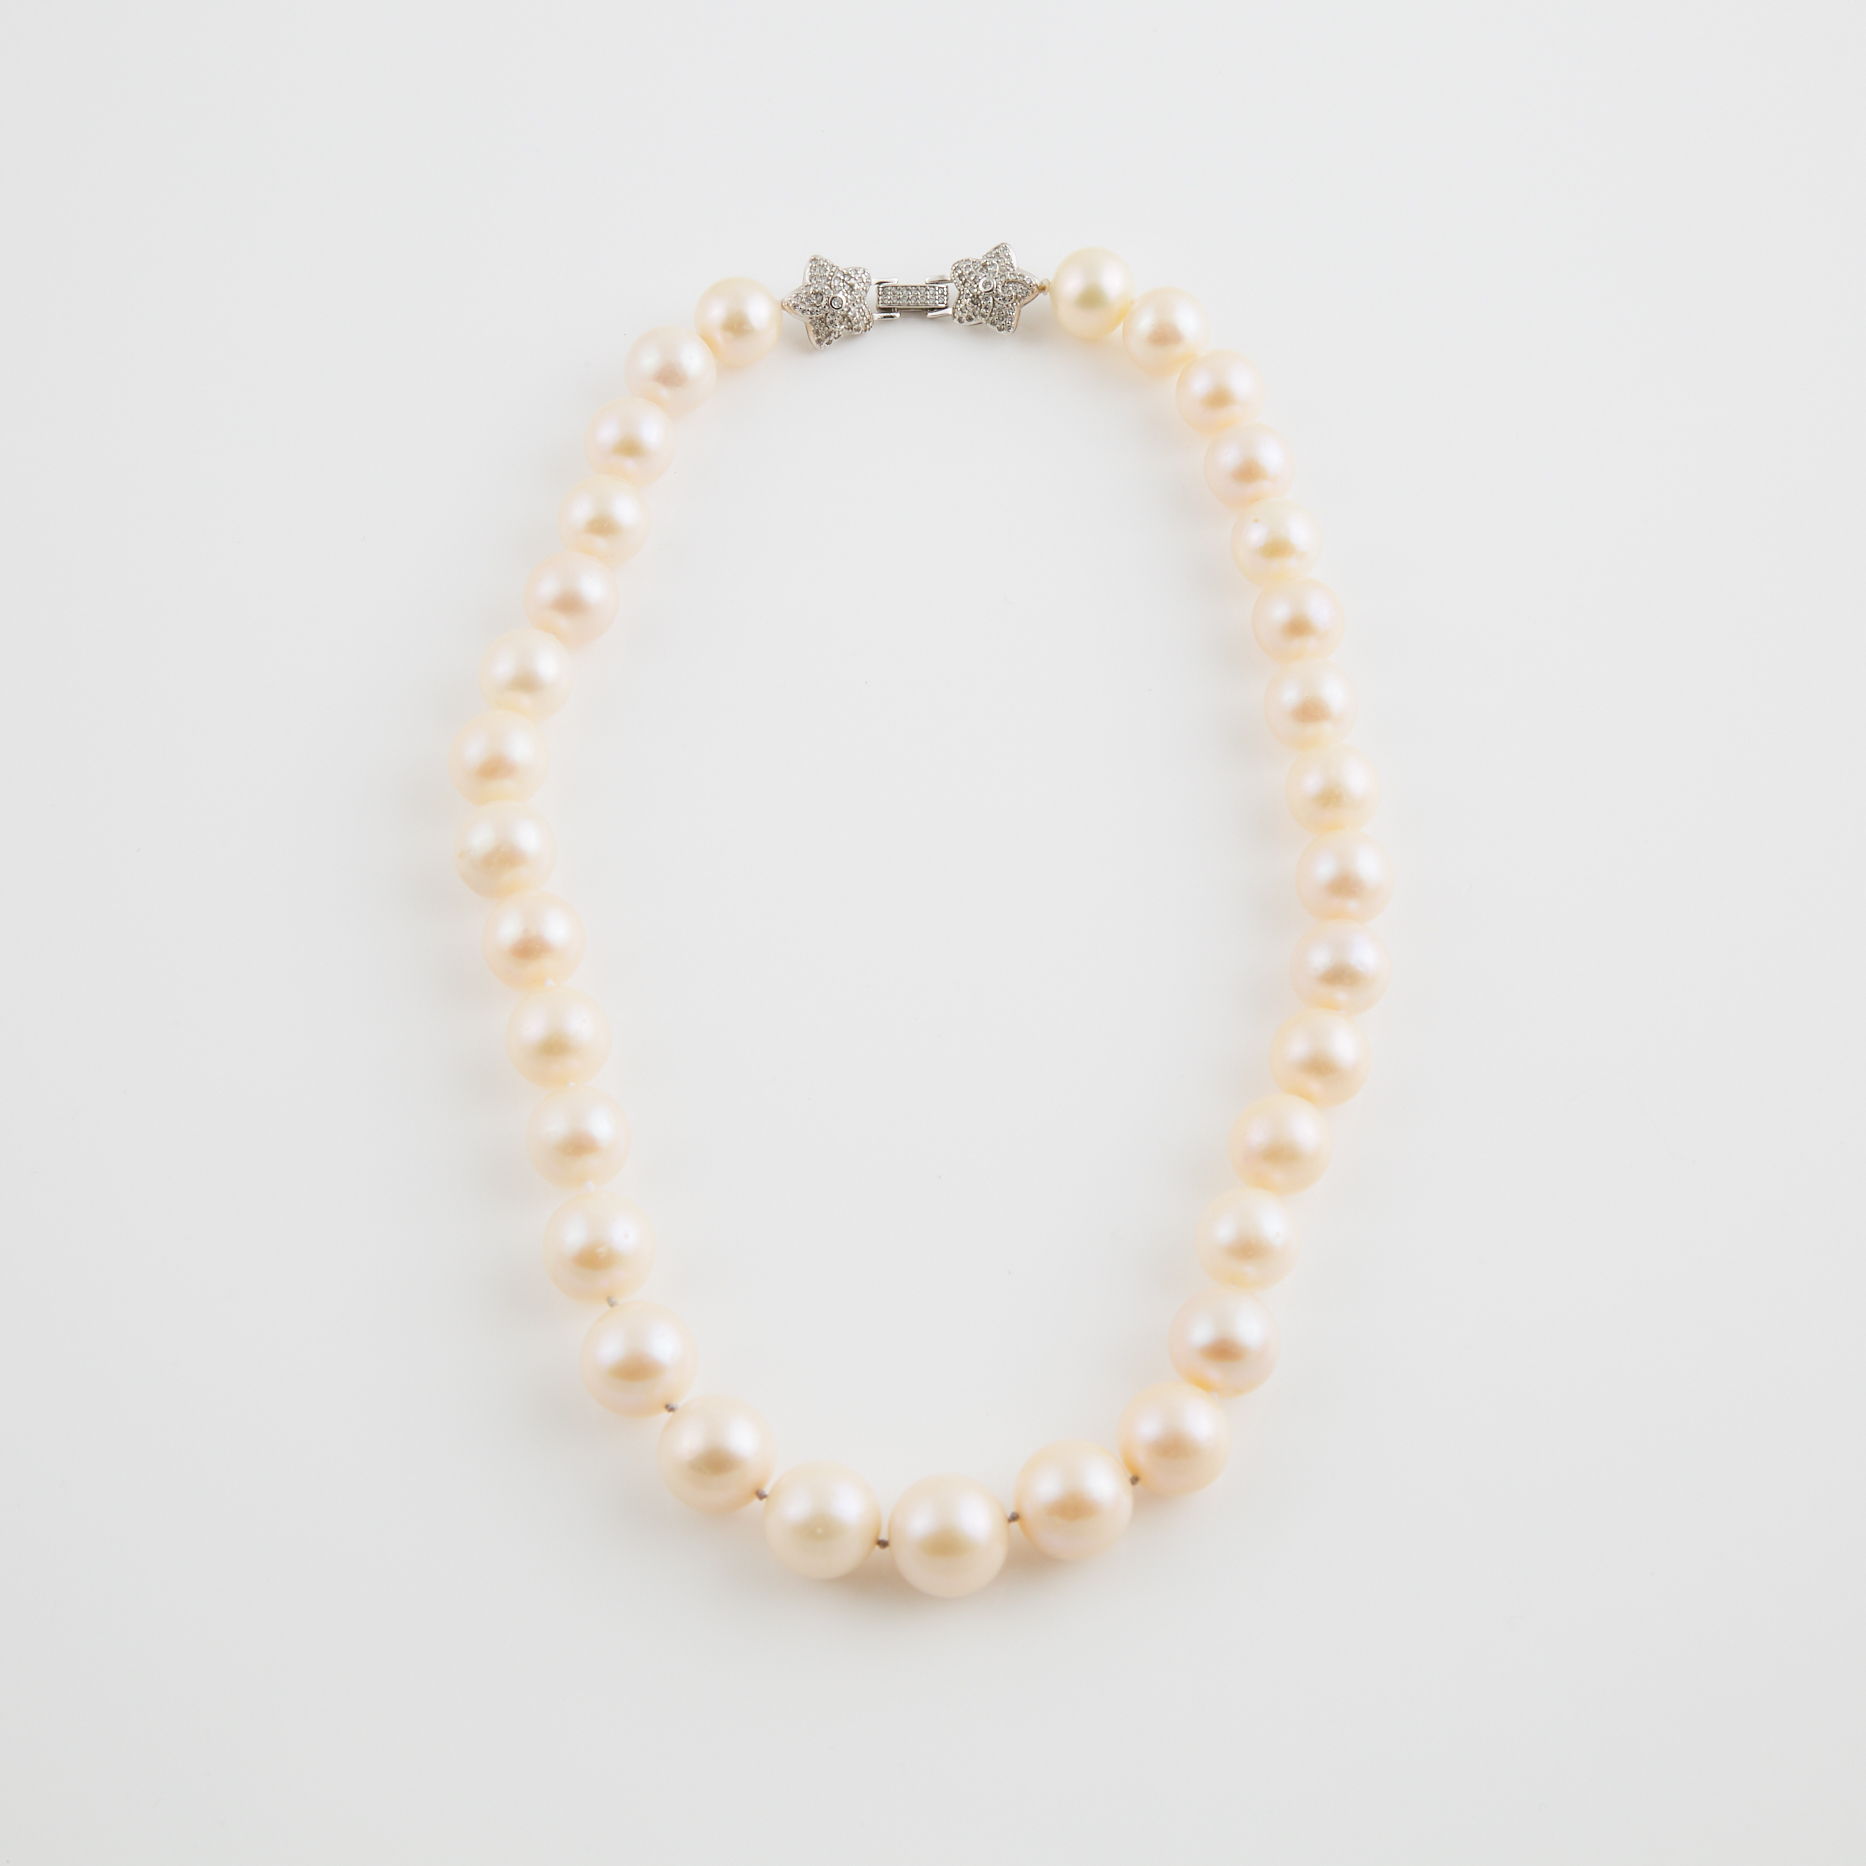 Single Strand Of Graduated Freshwater Pearls